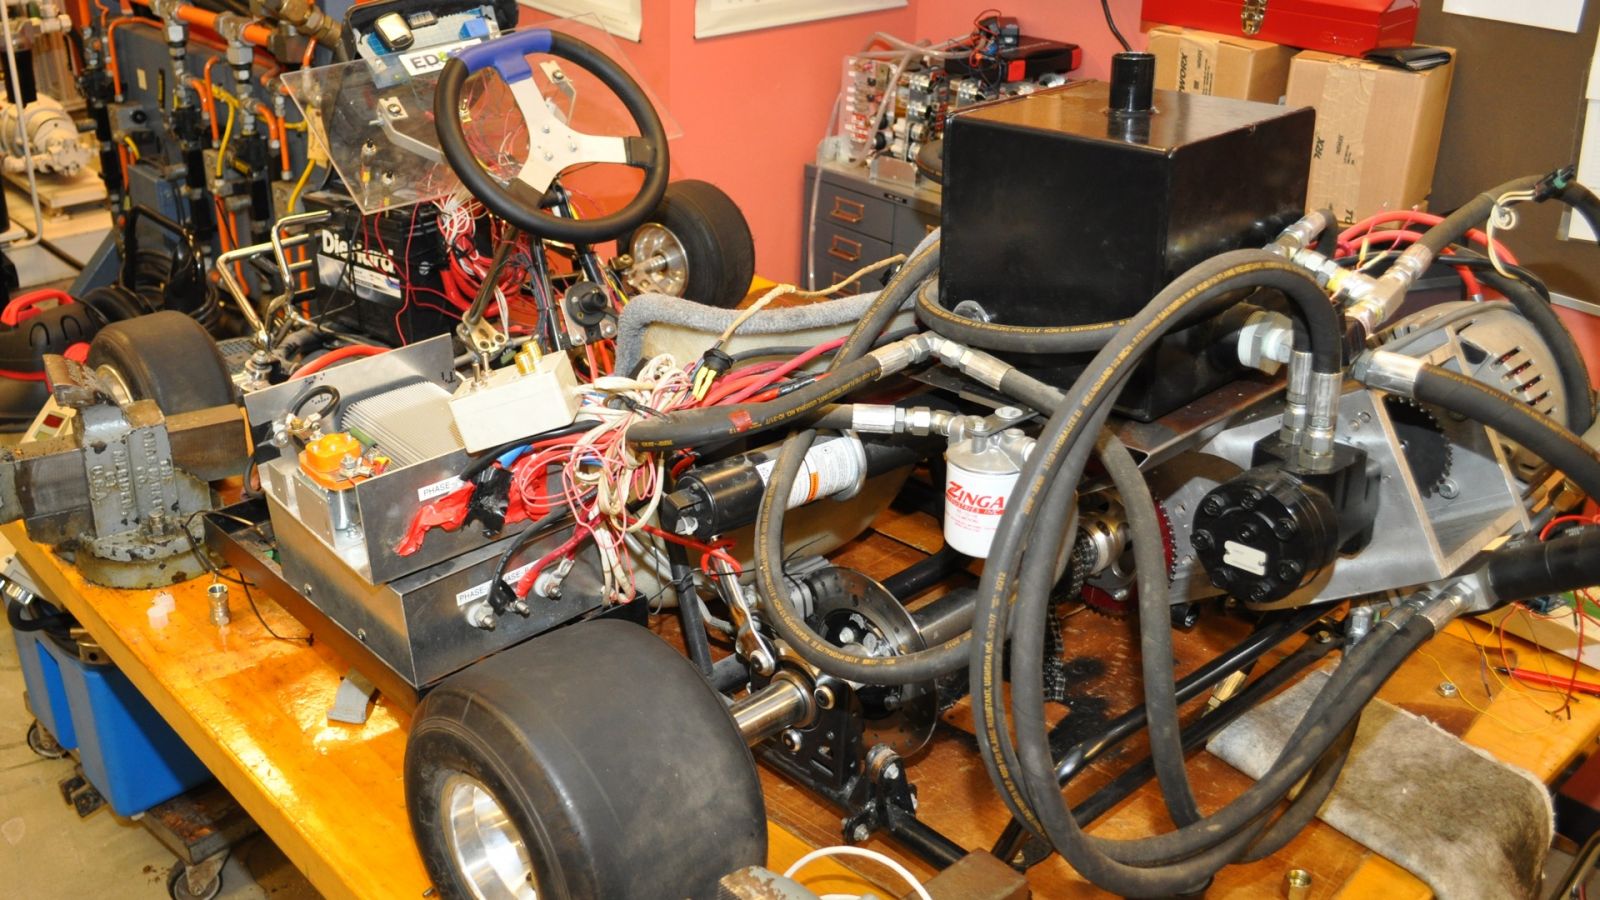 The hydraulic transmission in the go-kart is similar to that in an electric bus